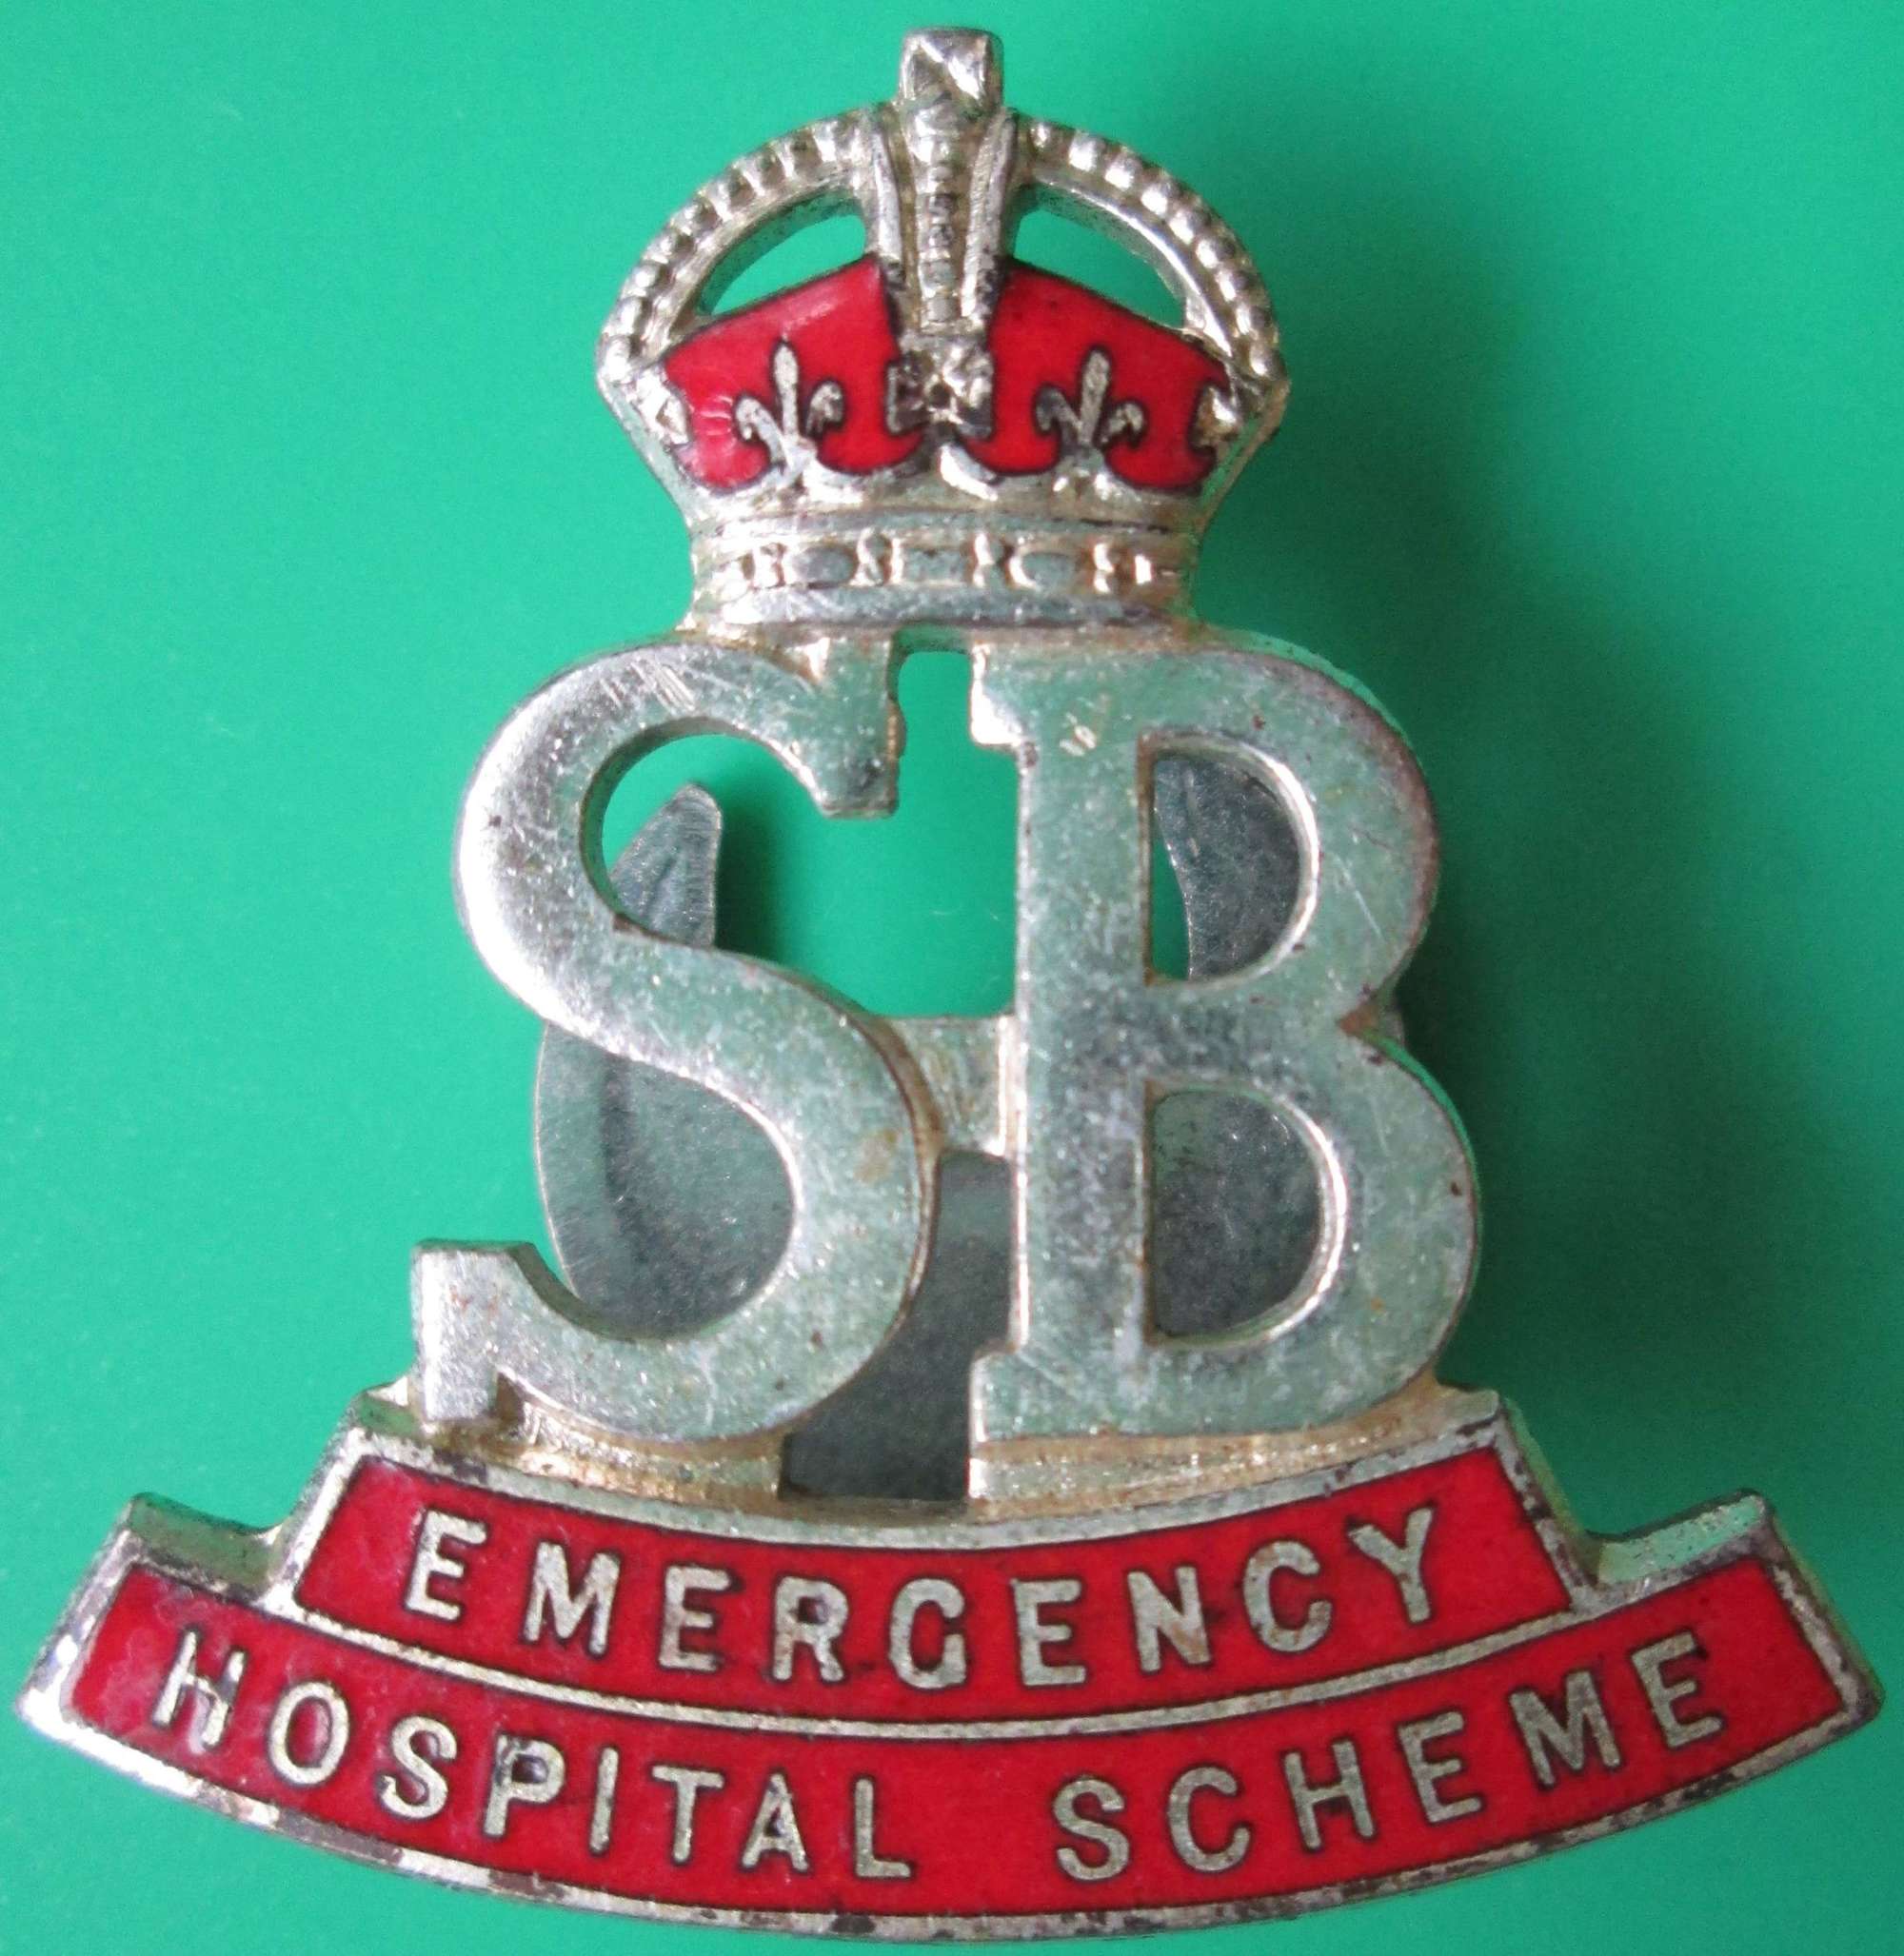 A LAPEL BADGE FOR STRETCHER BEARERS,THE EMERGENCY HOSPITAL SCHEME